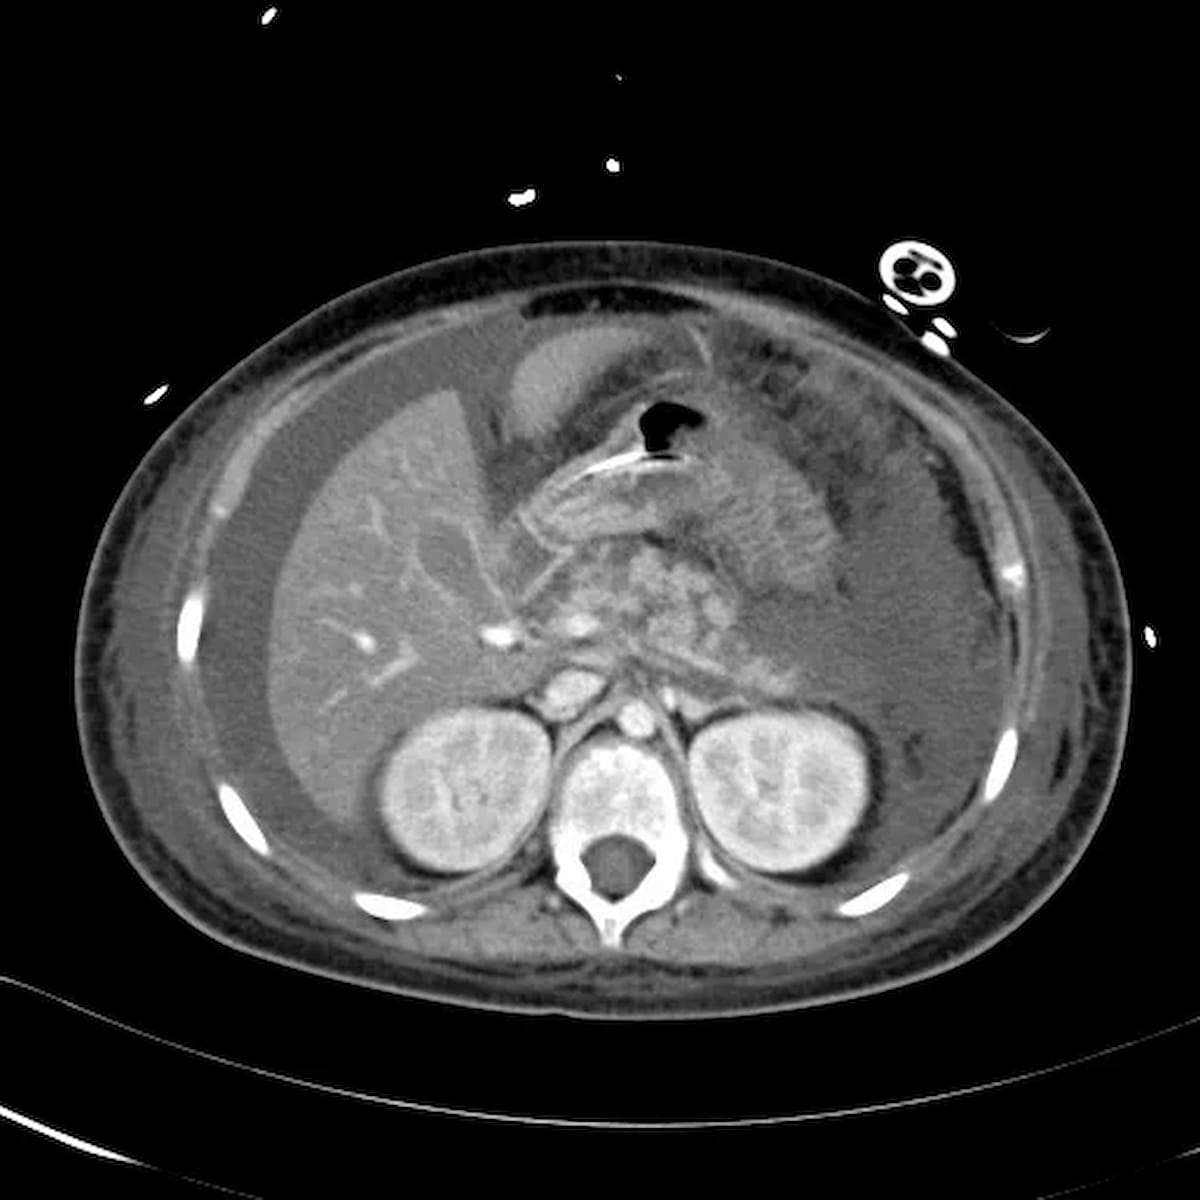 Image IQ Quiz: Patient with Abdominal Pain, New Medications, and Elevated Lipase